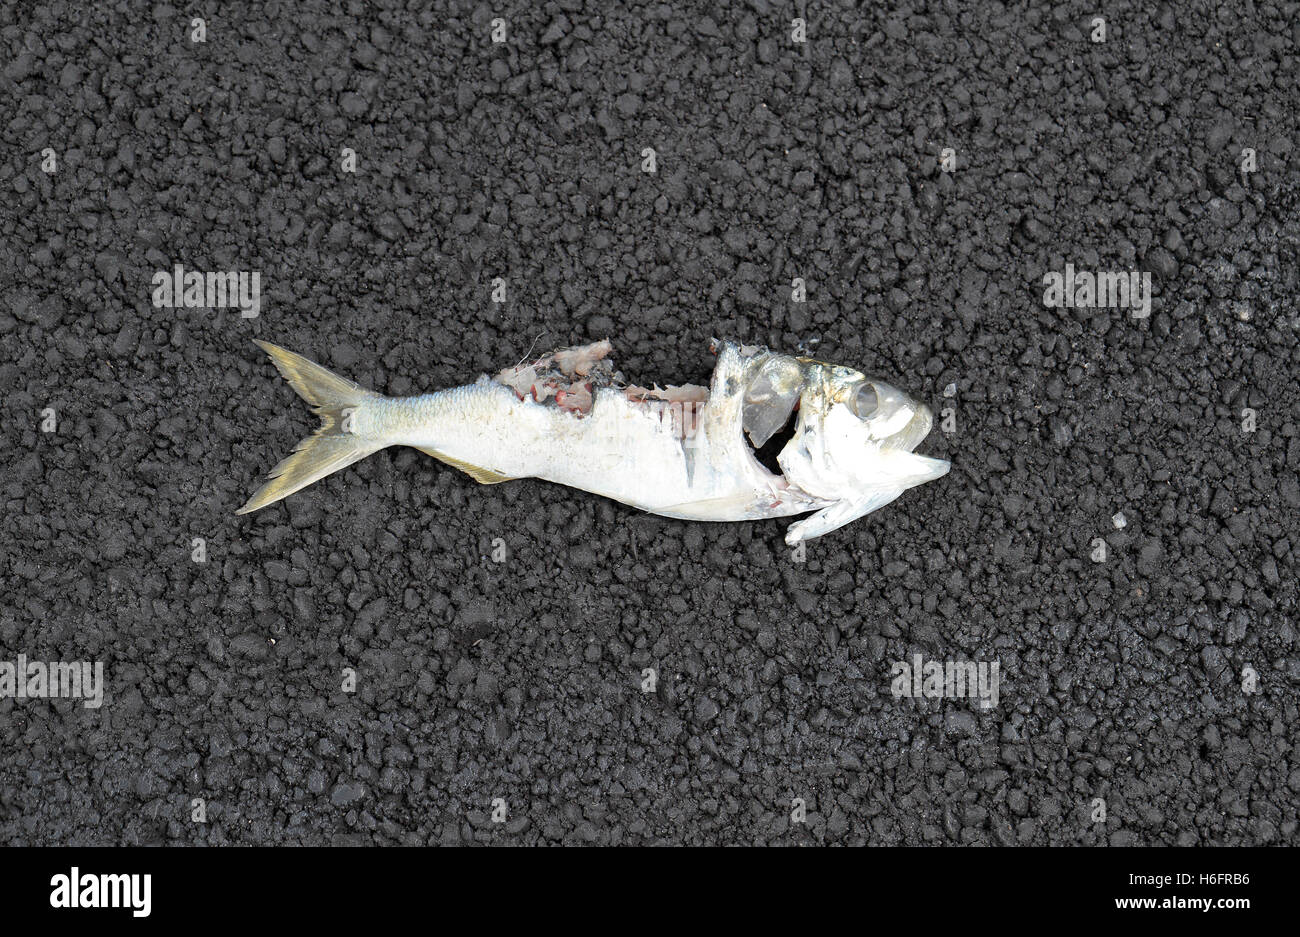 A partially eaten fish (dropped by a bird perhaps? seagull?) on a path on Governors Island, New York, United States. Stock Photo